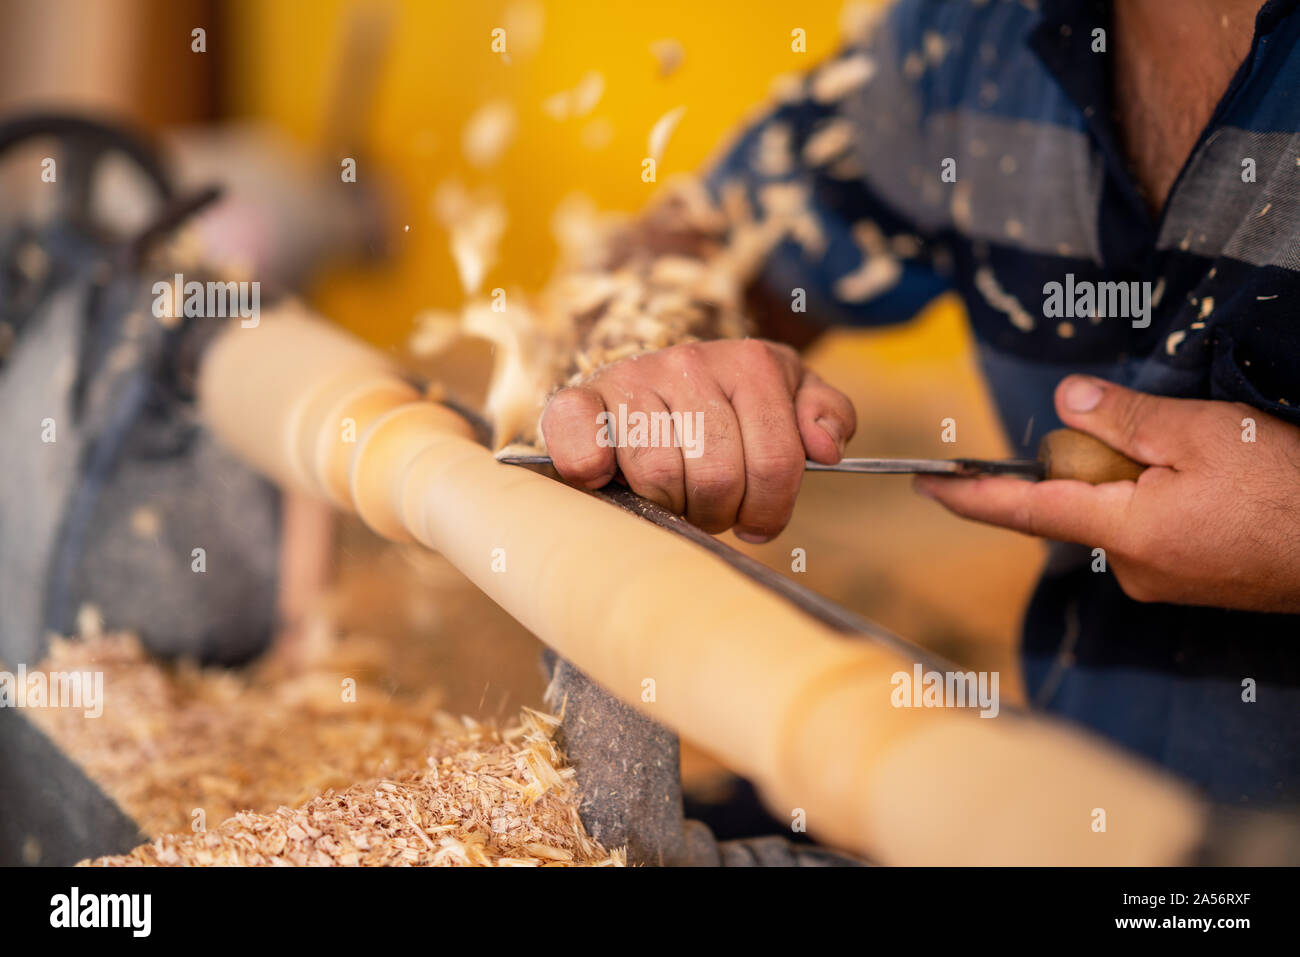 Carpenter working on wood to carving and shaping. Stock Photo